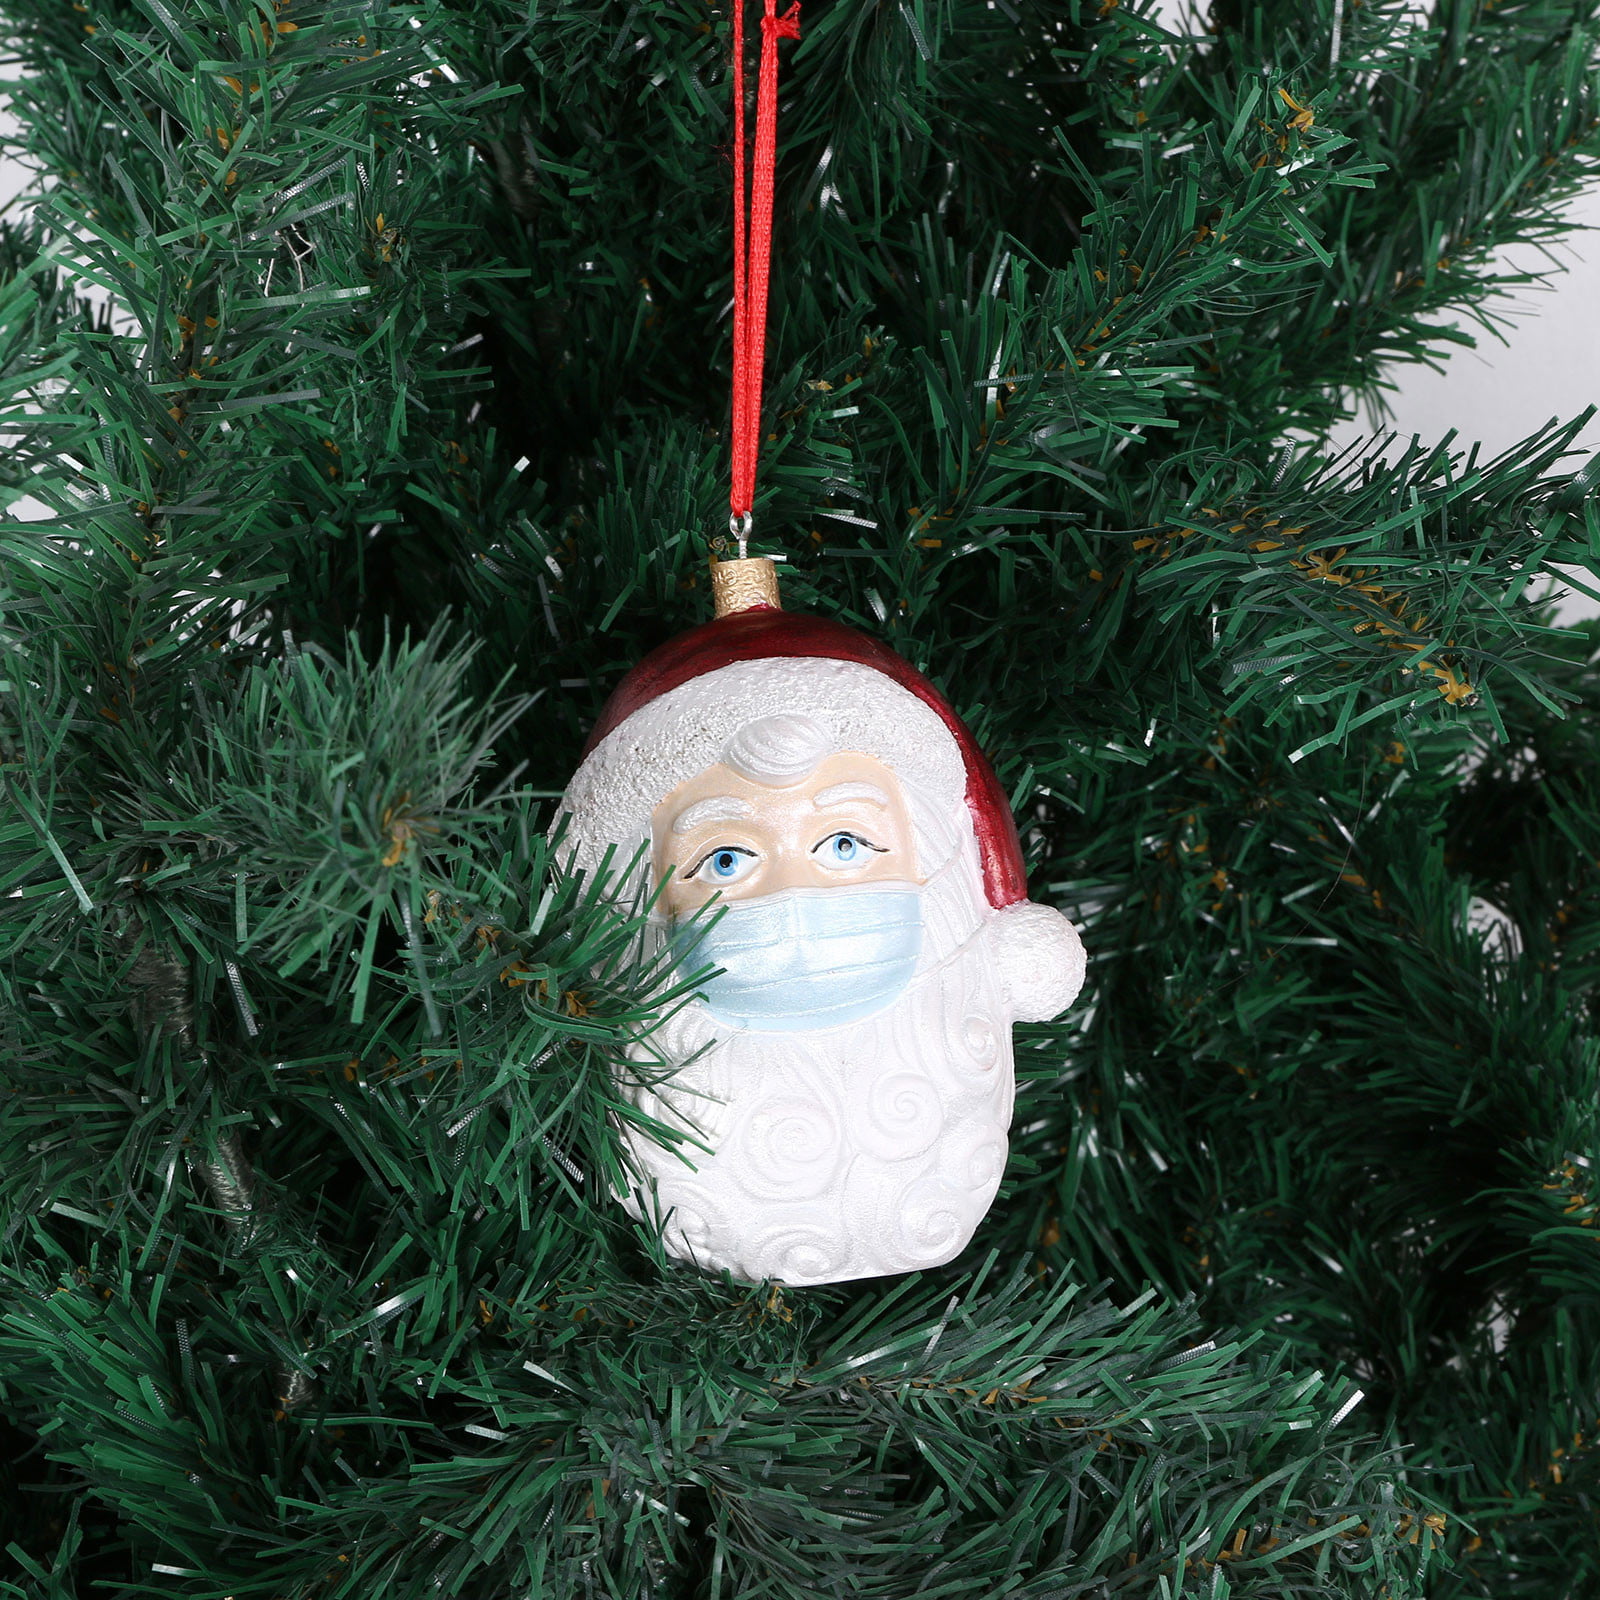 Details about   Christmas Tree Ornaments Personalized Santa Claus Of Ornament 2020 Christmas 1Pc 